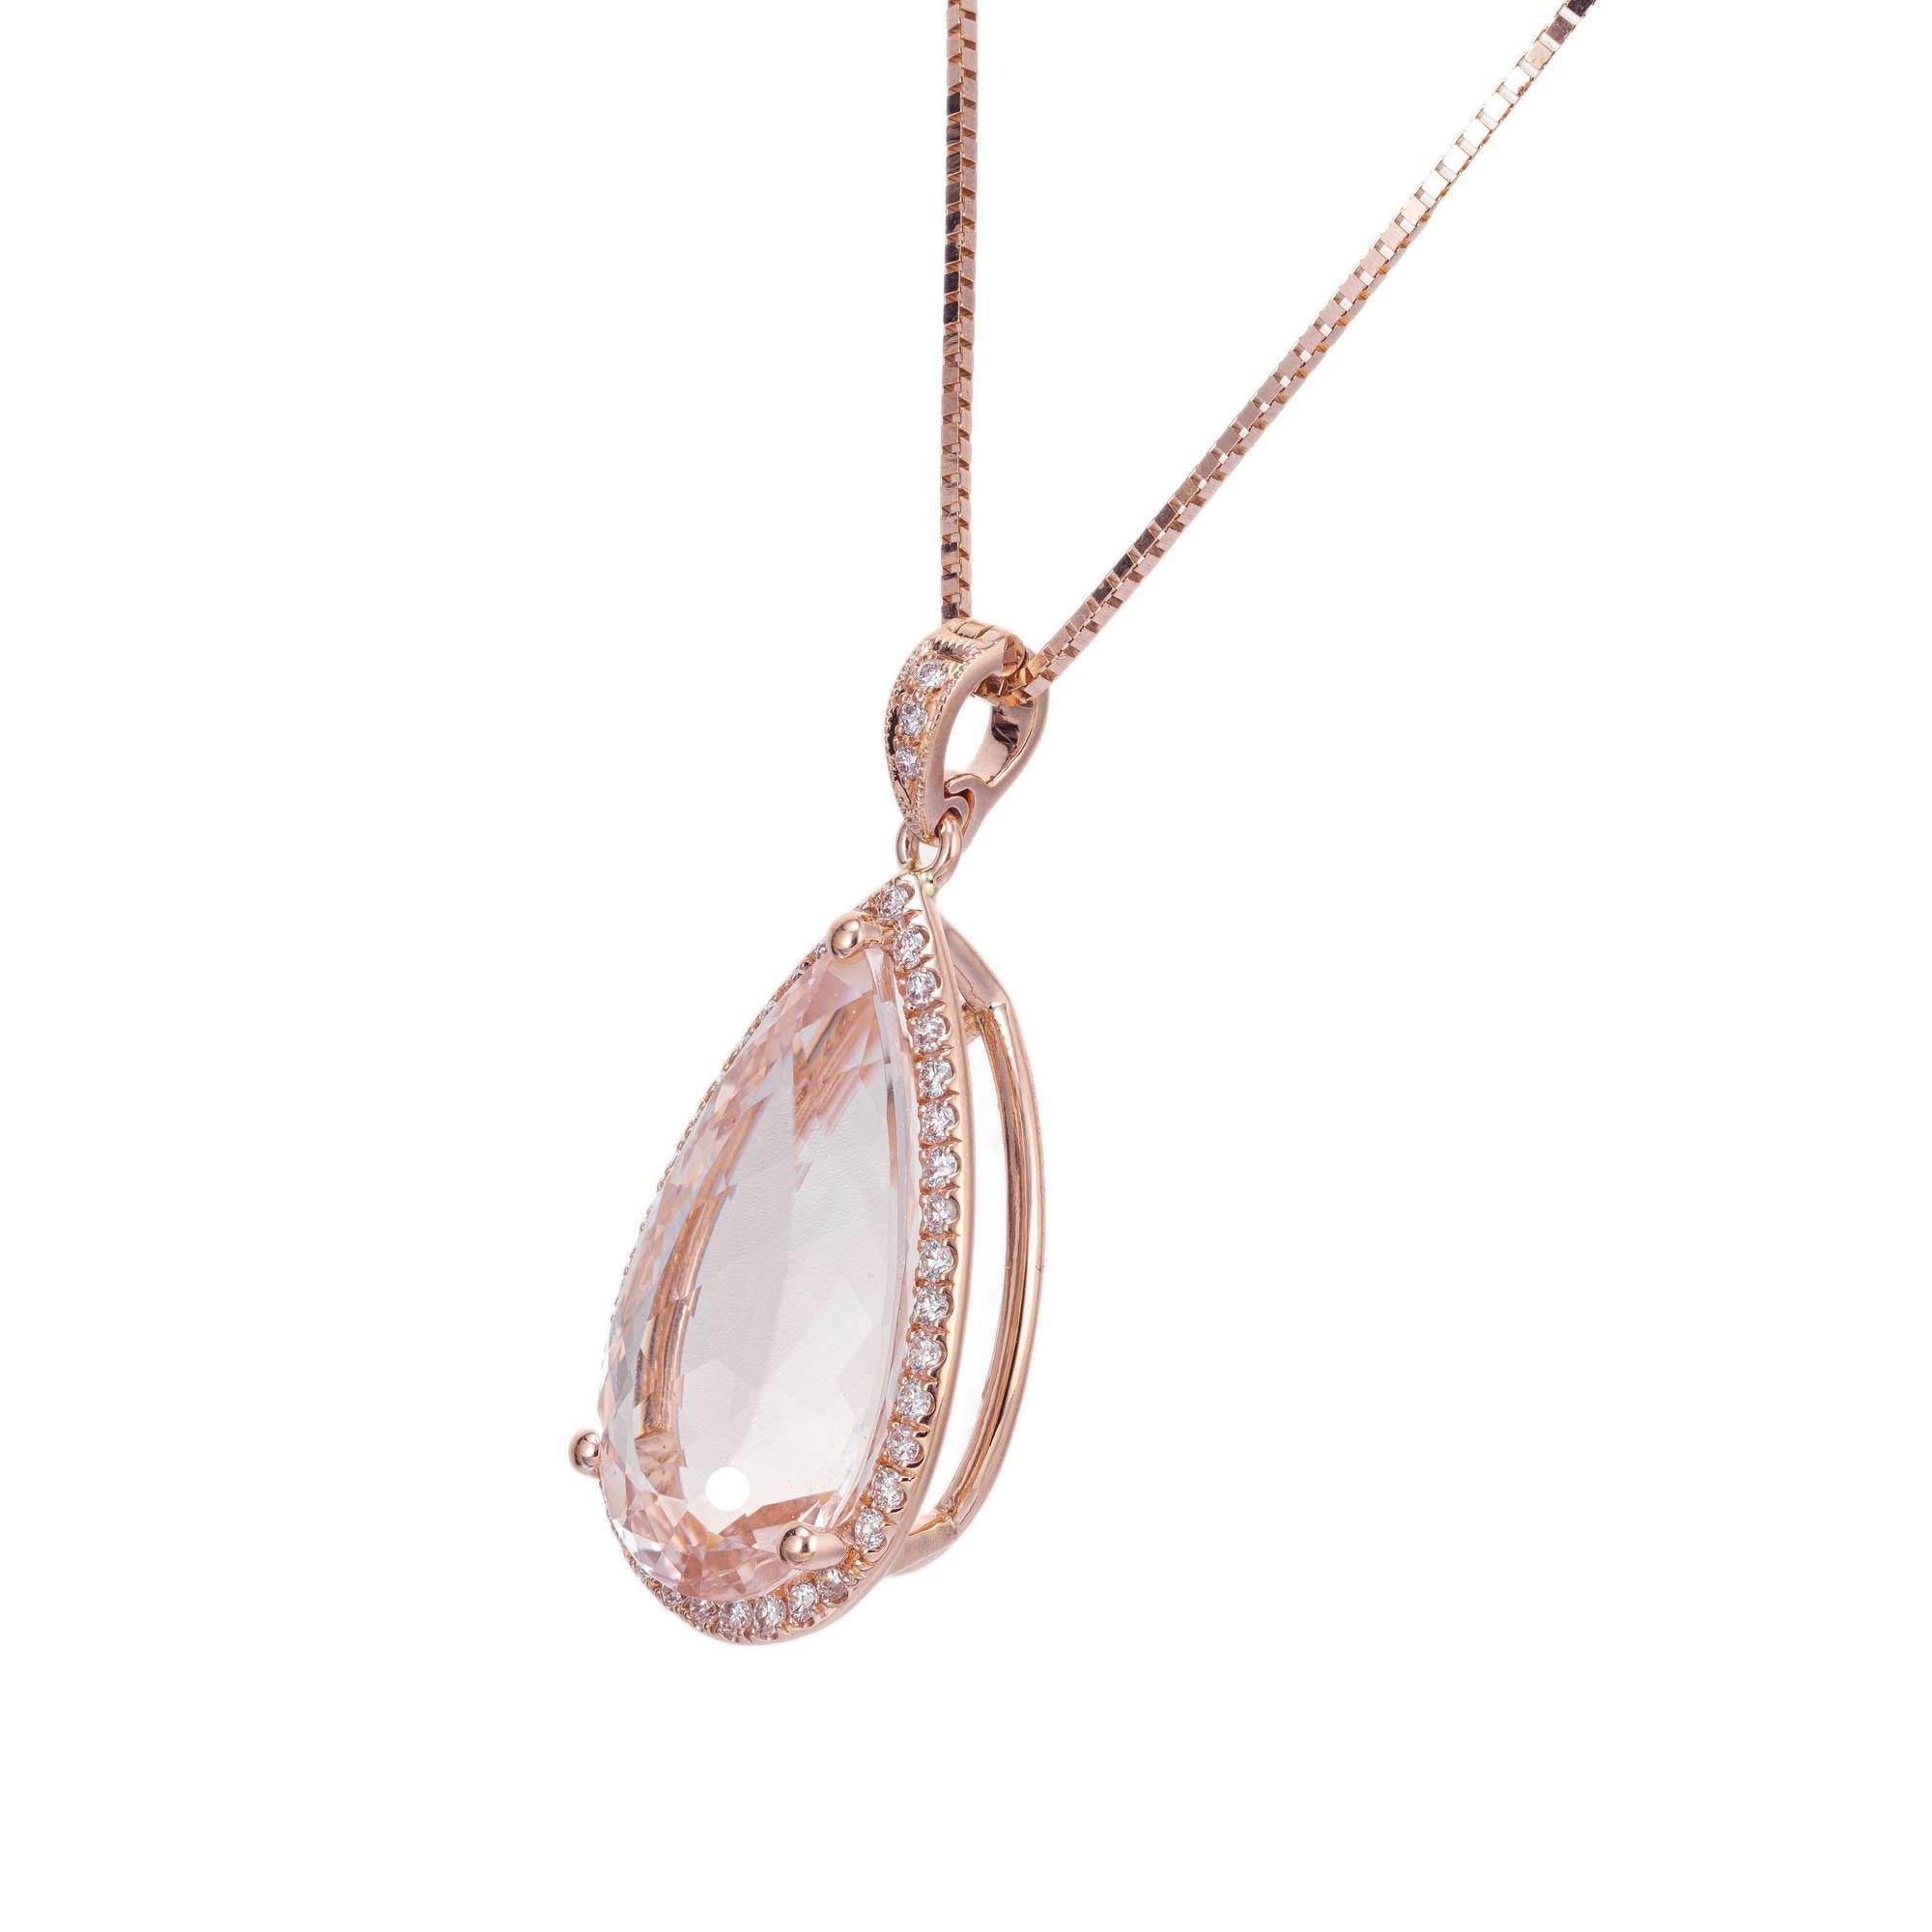 Soft pink 8.56 carat morganite and diamond pendant necklace. Pear shaped morganite with a halo of 41 round brilliant cut diamonds. 14k rose gold setting and 16 inch chain. Designed and crafted in the Peter Suchy workshop

1 pear shaped pink